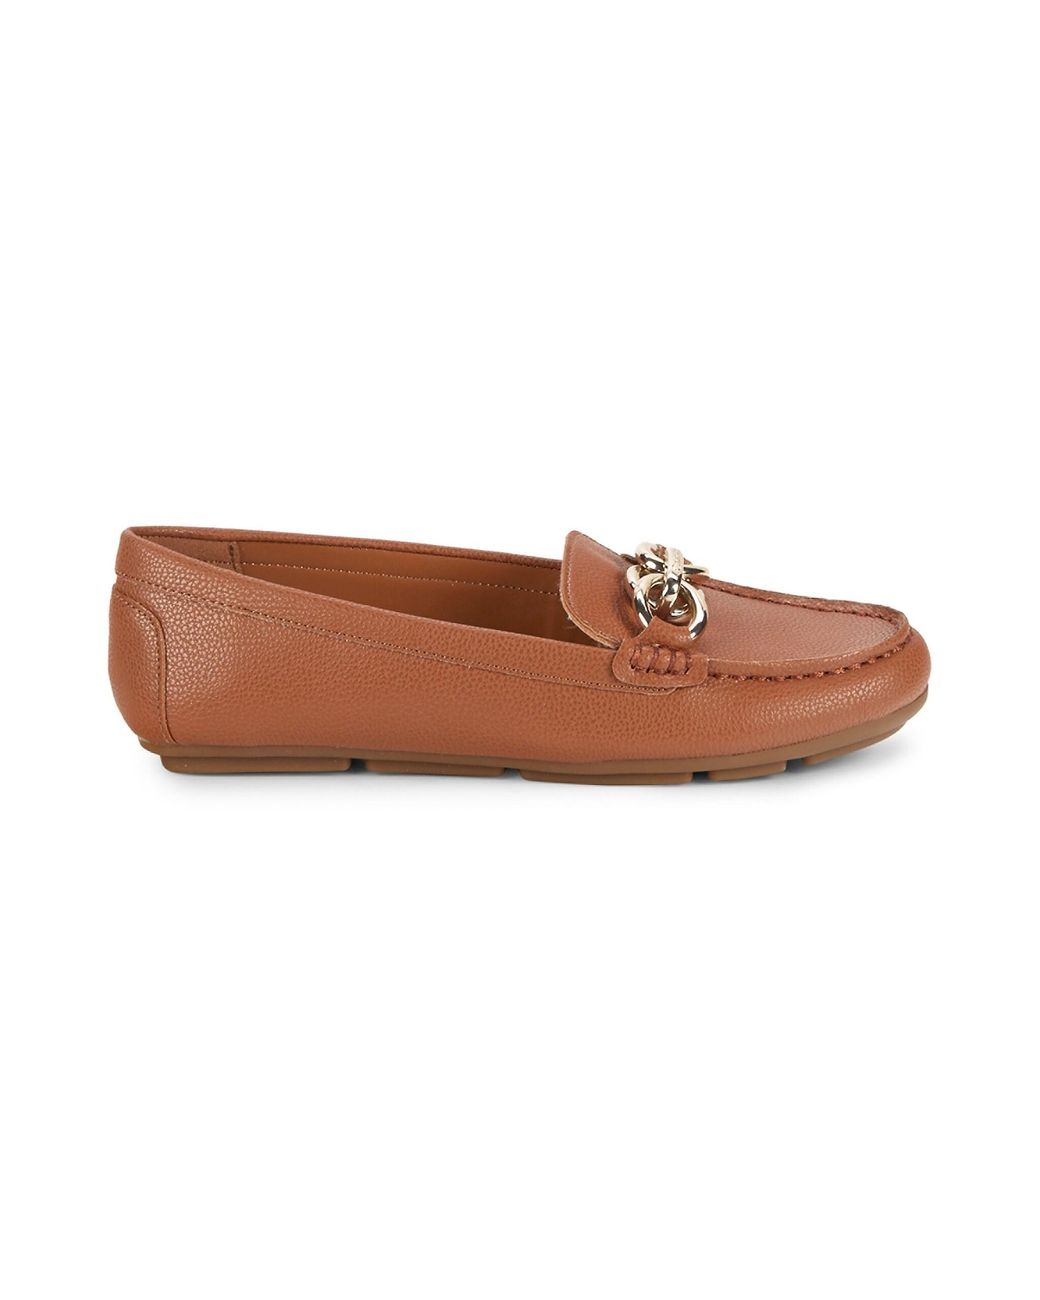 Calvin Klein Luca Bit Loafers in Natural | Lyst